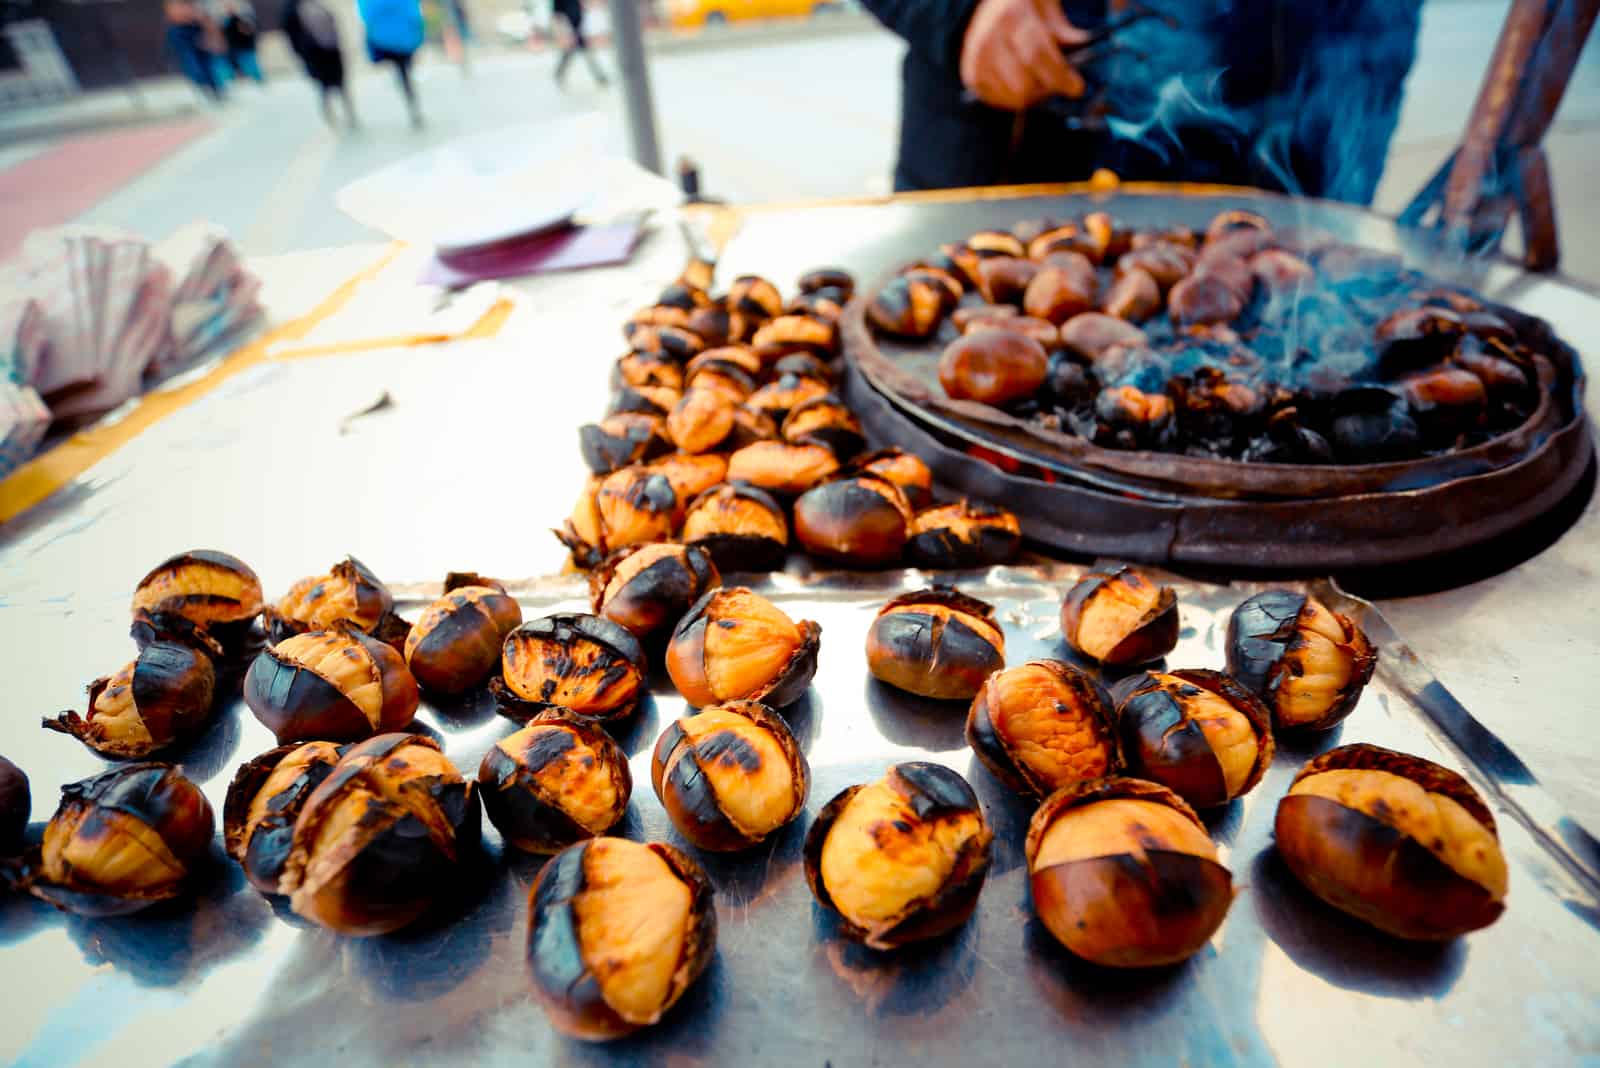 a man sells roasted chestnuts on the street